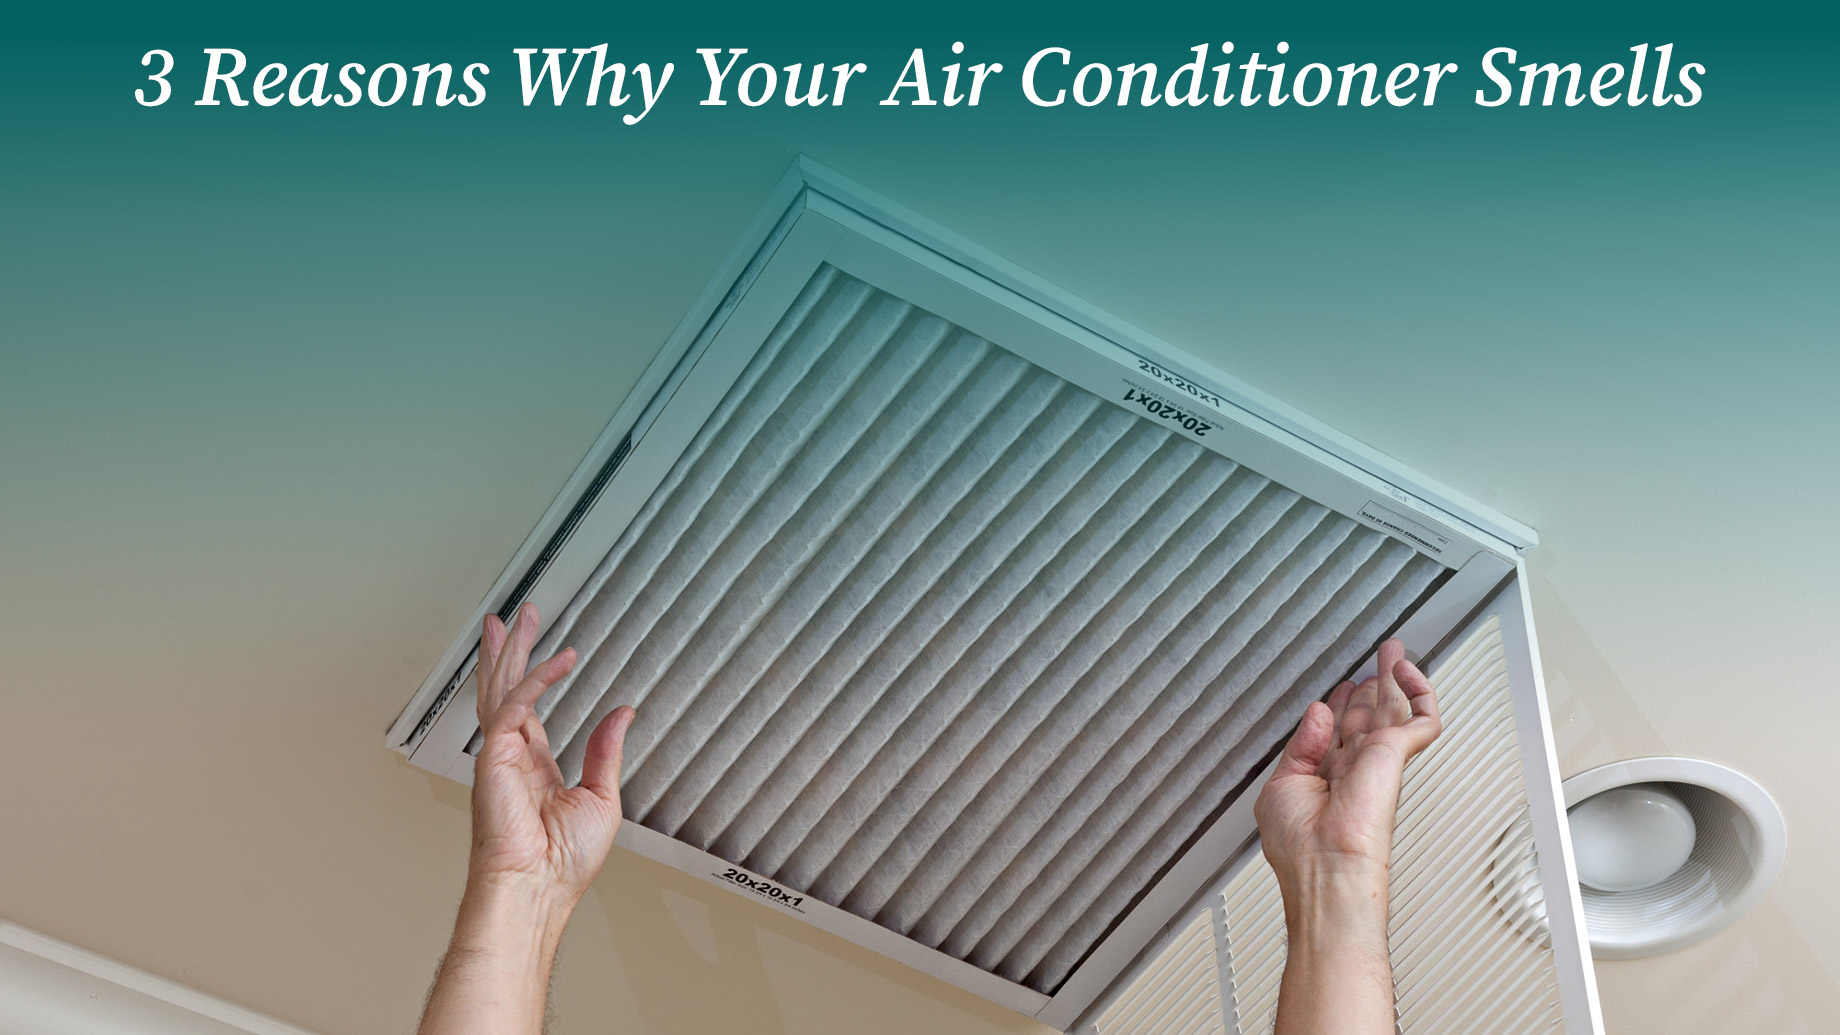 3 Reasons Why Your Air Conditioner Smells – The Pinnacle List